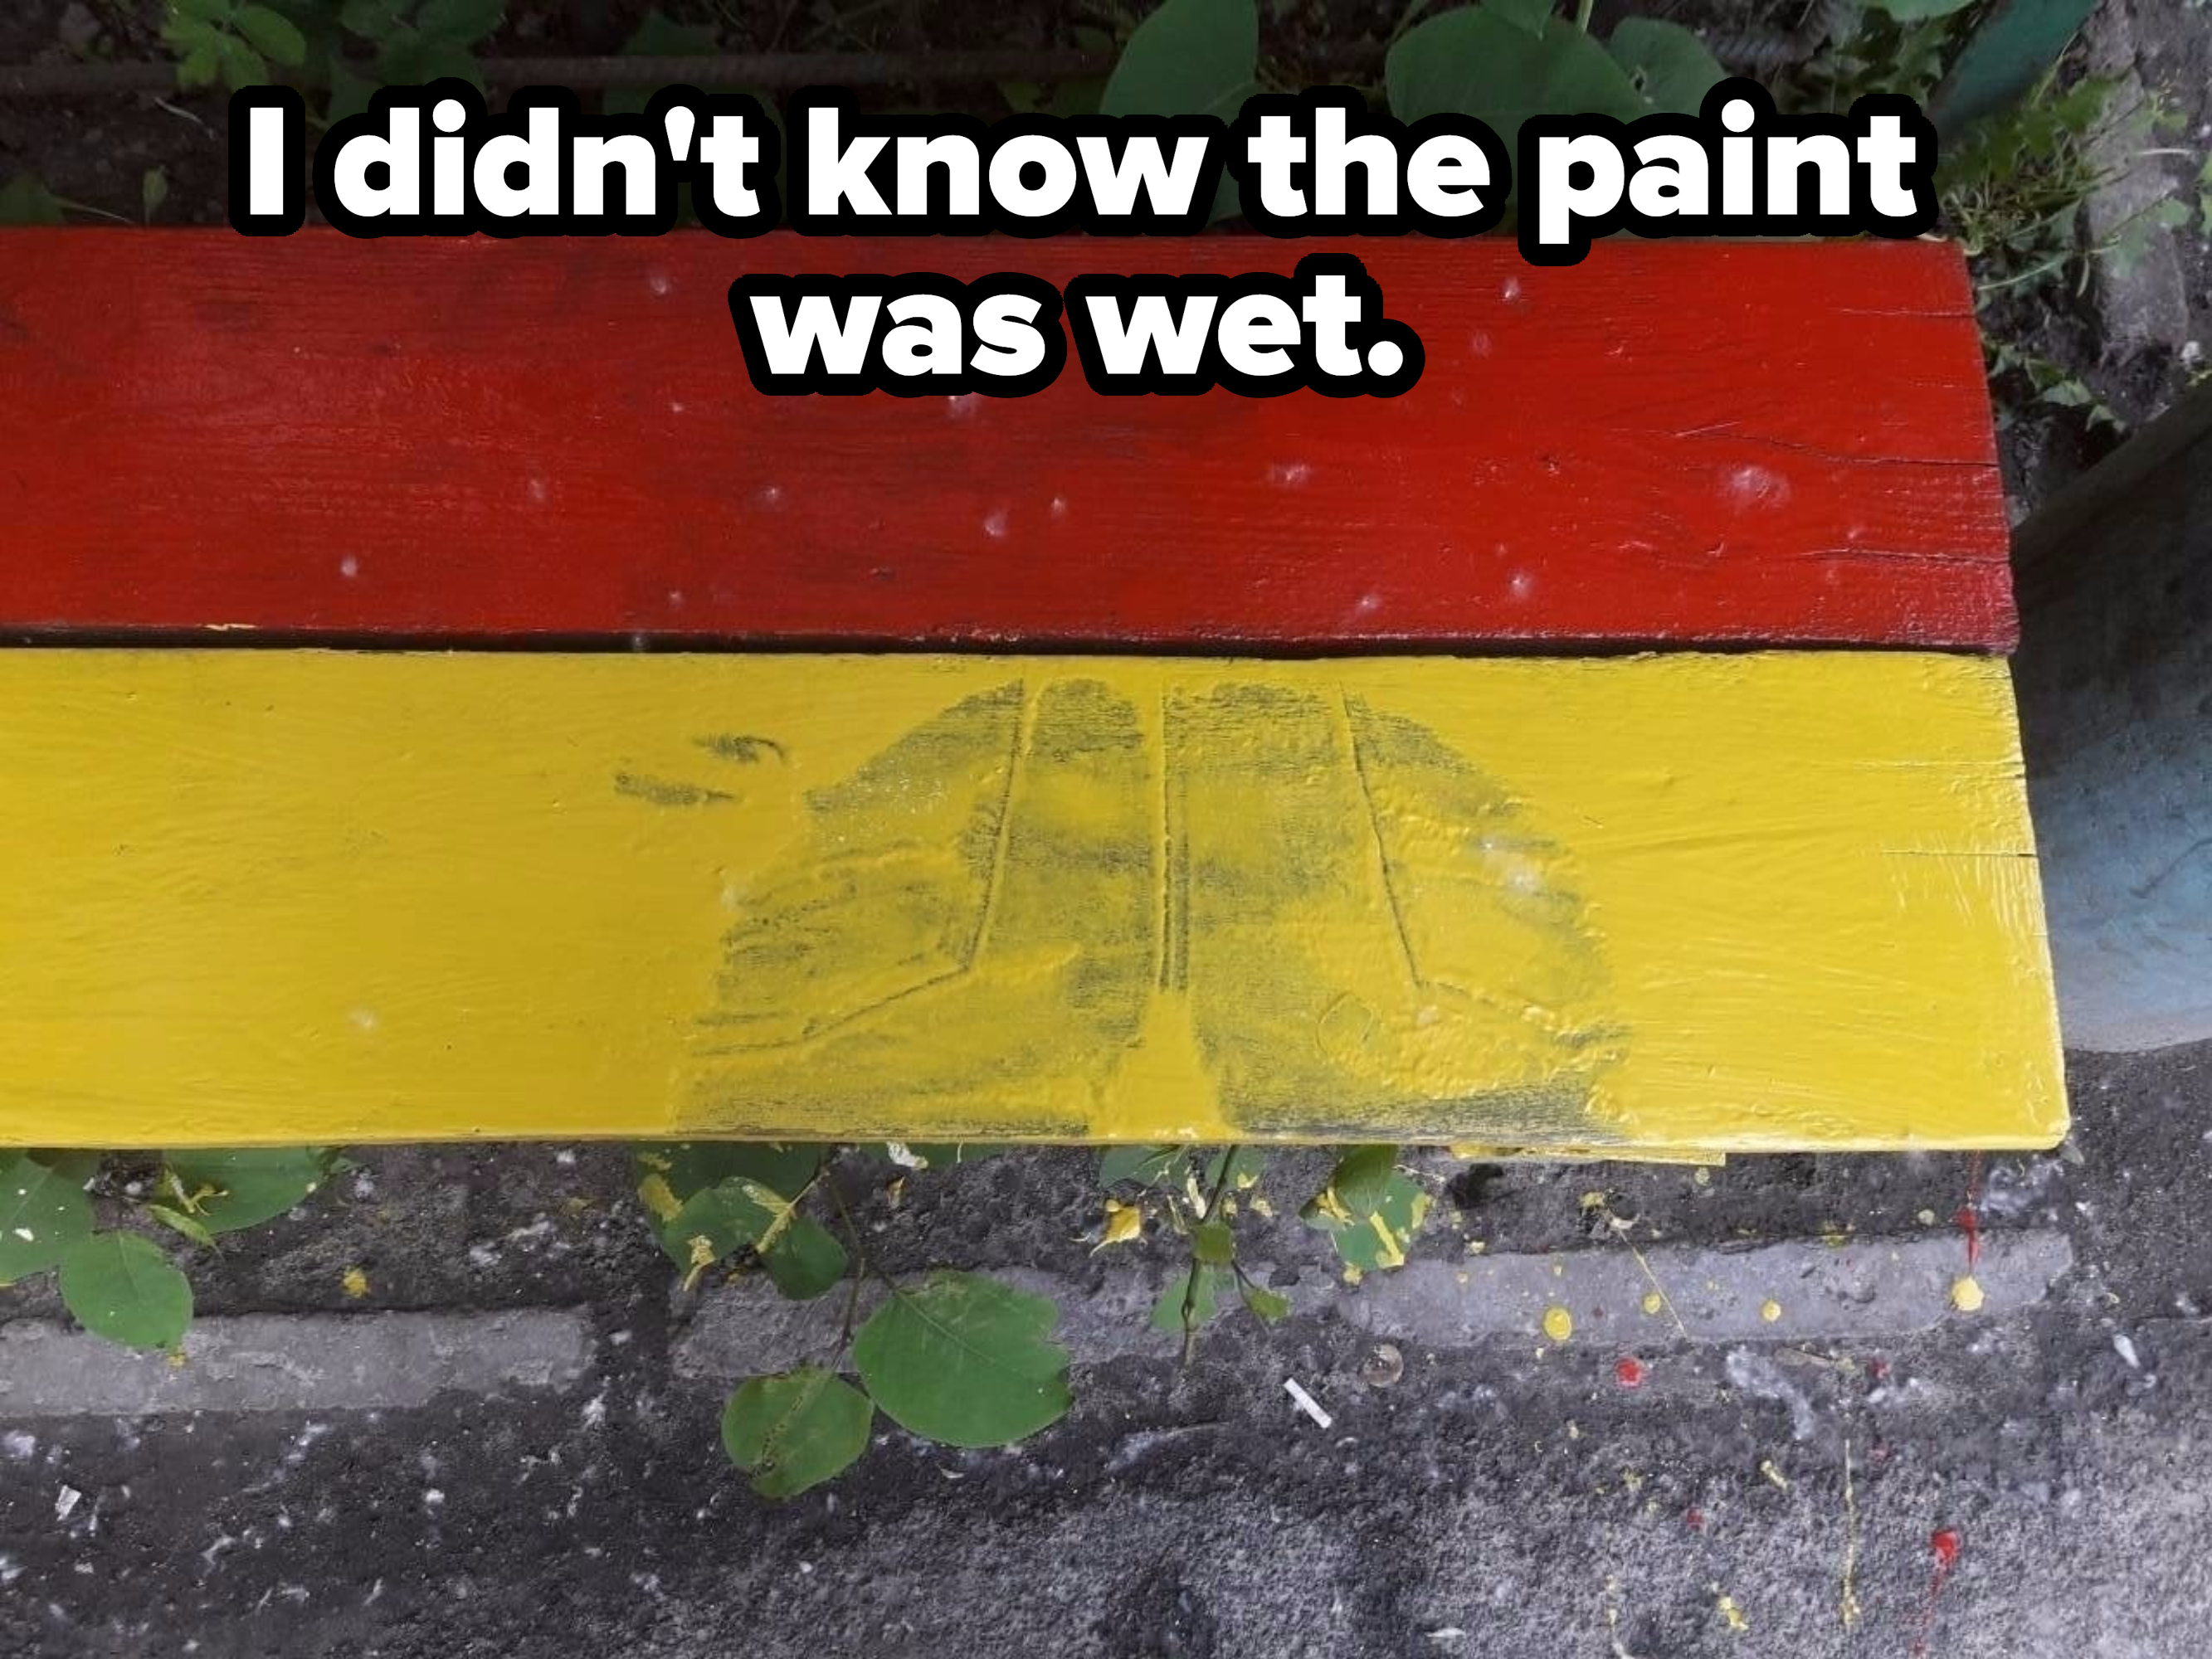 &quot;I didn&#x27;t know the paint was wet,&quot; with footprints on a floor surface